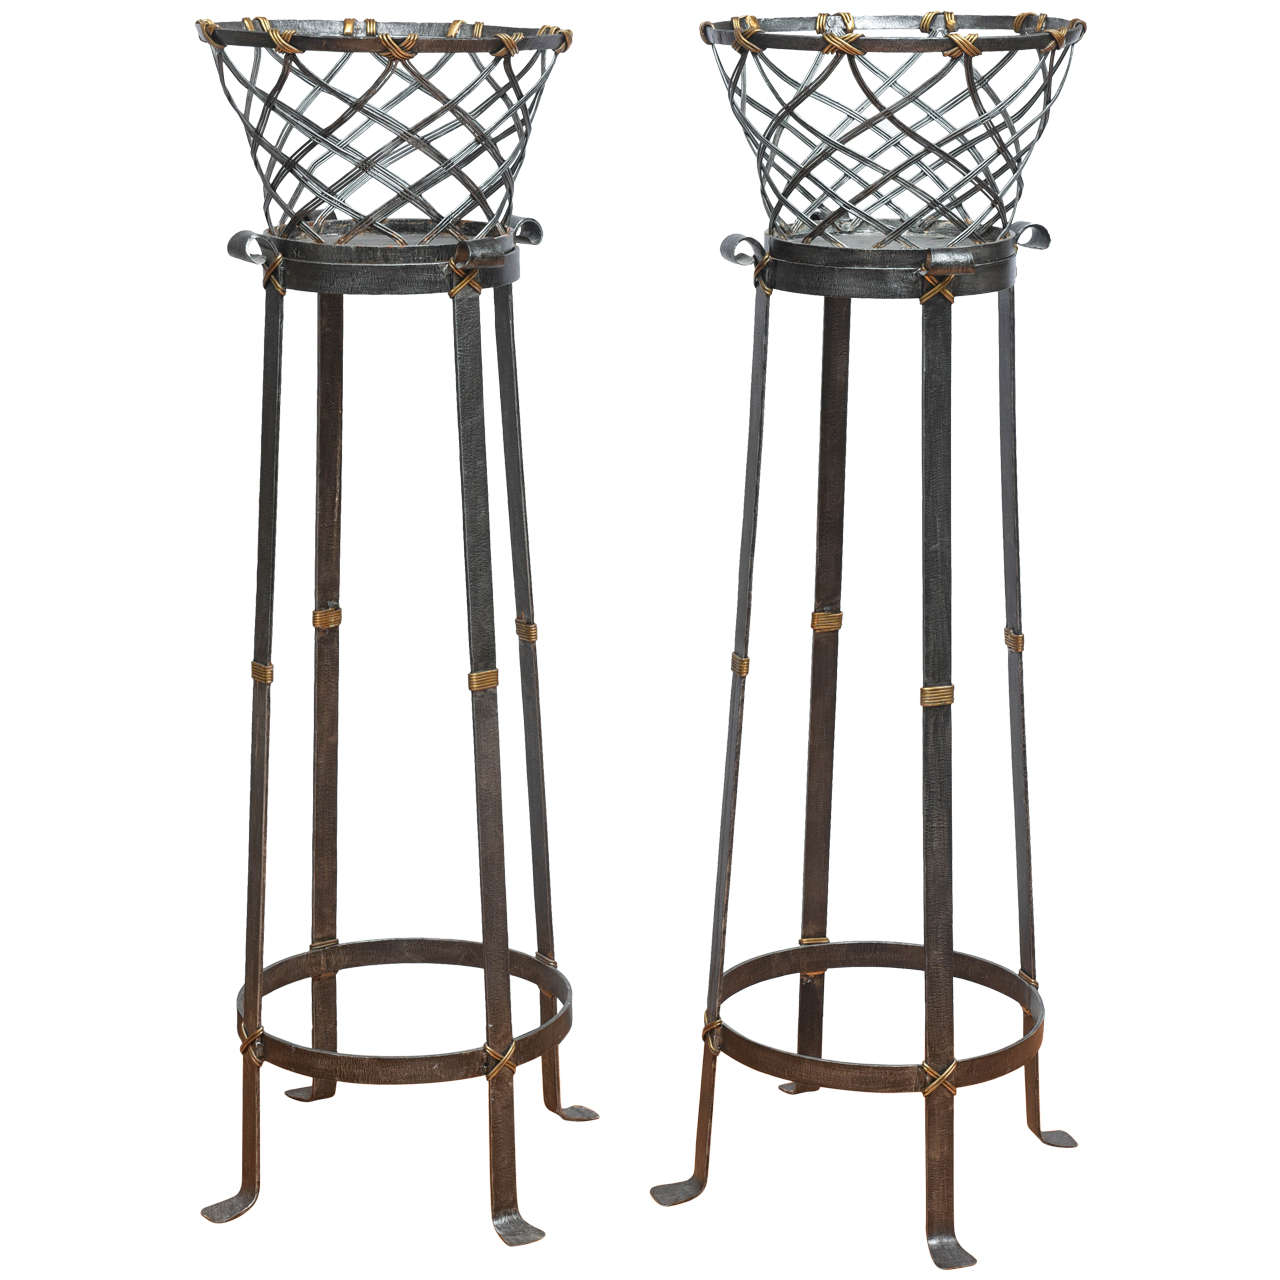 Pair of Neoclassical Plant Stands